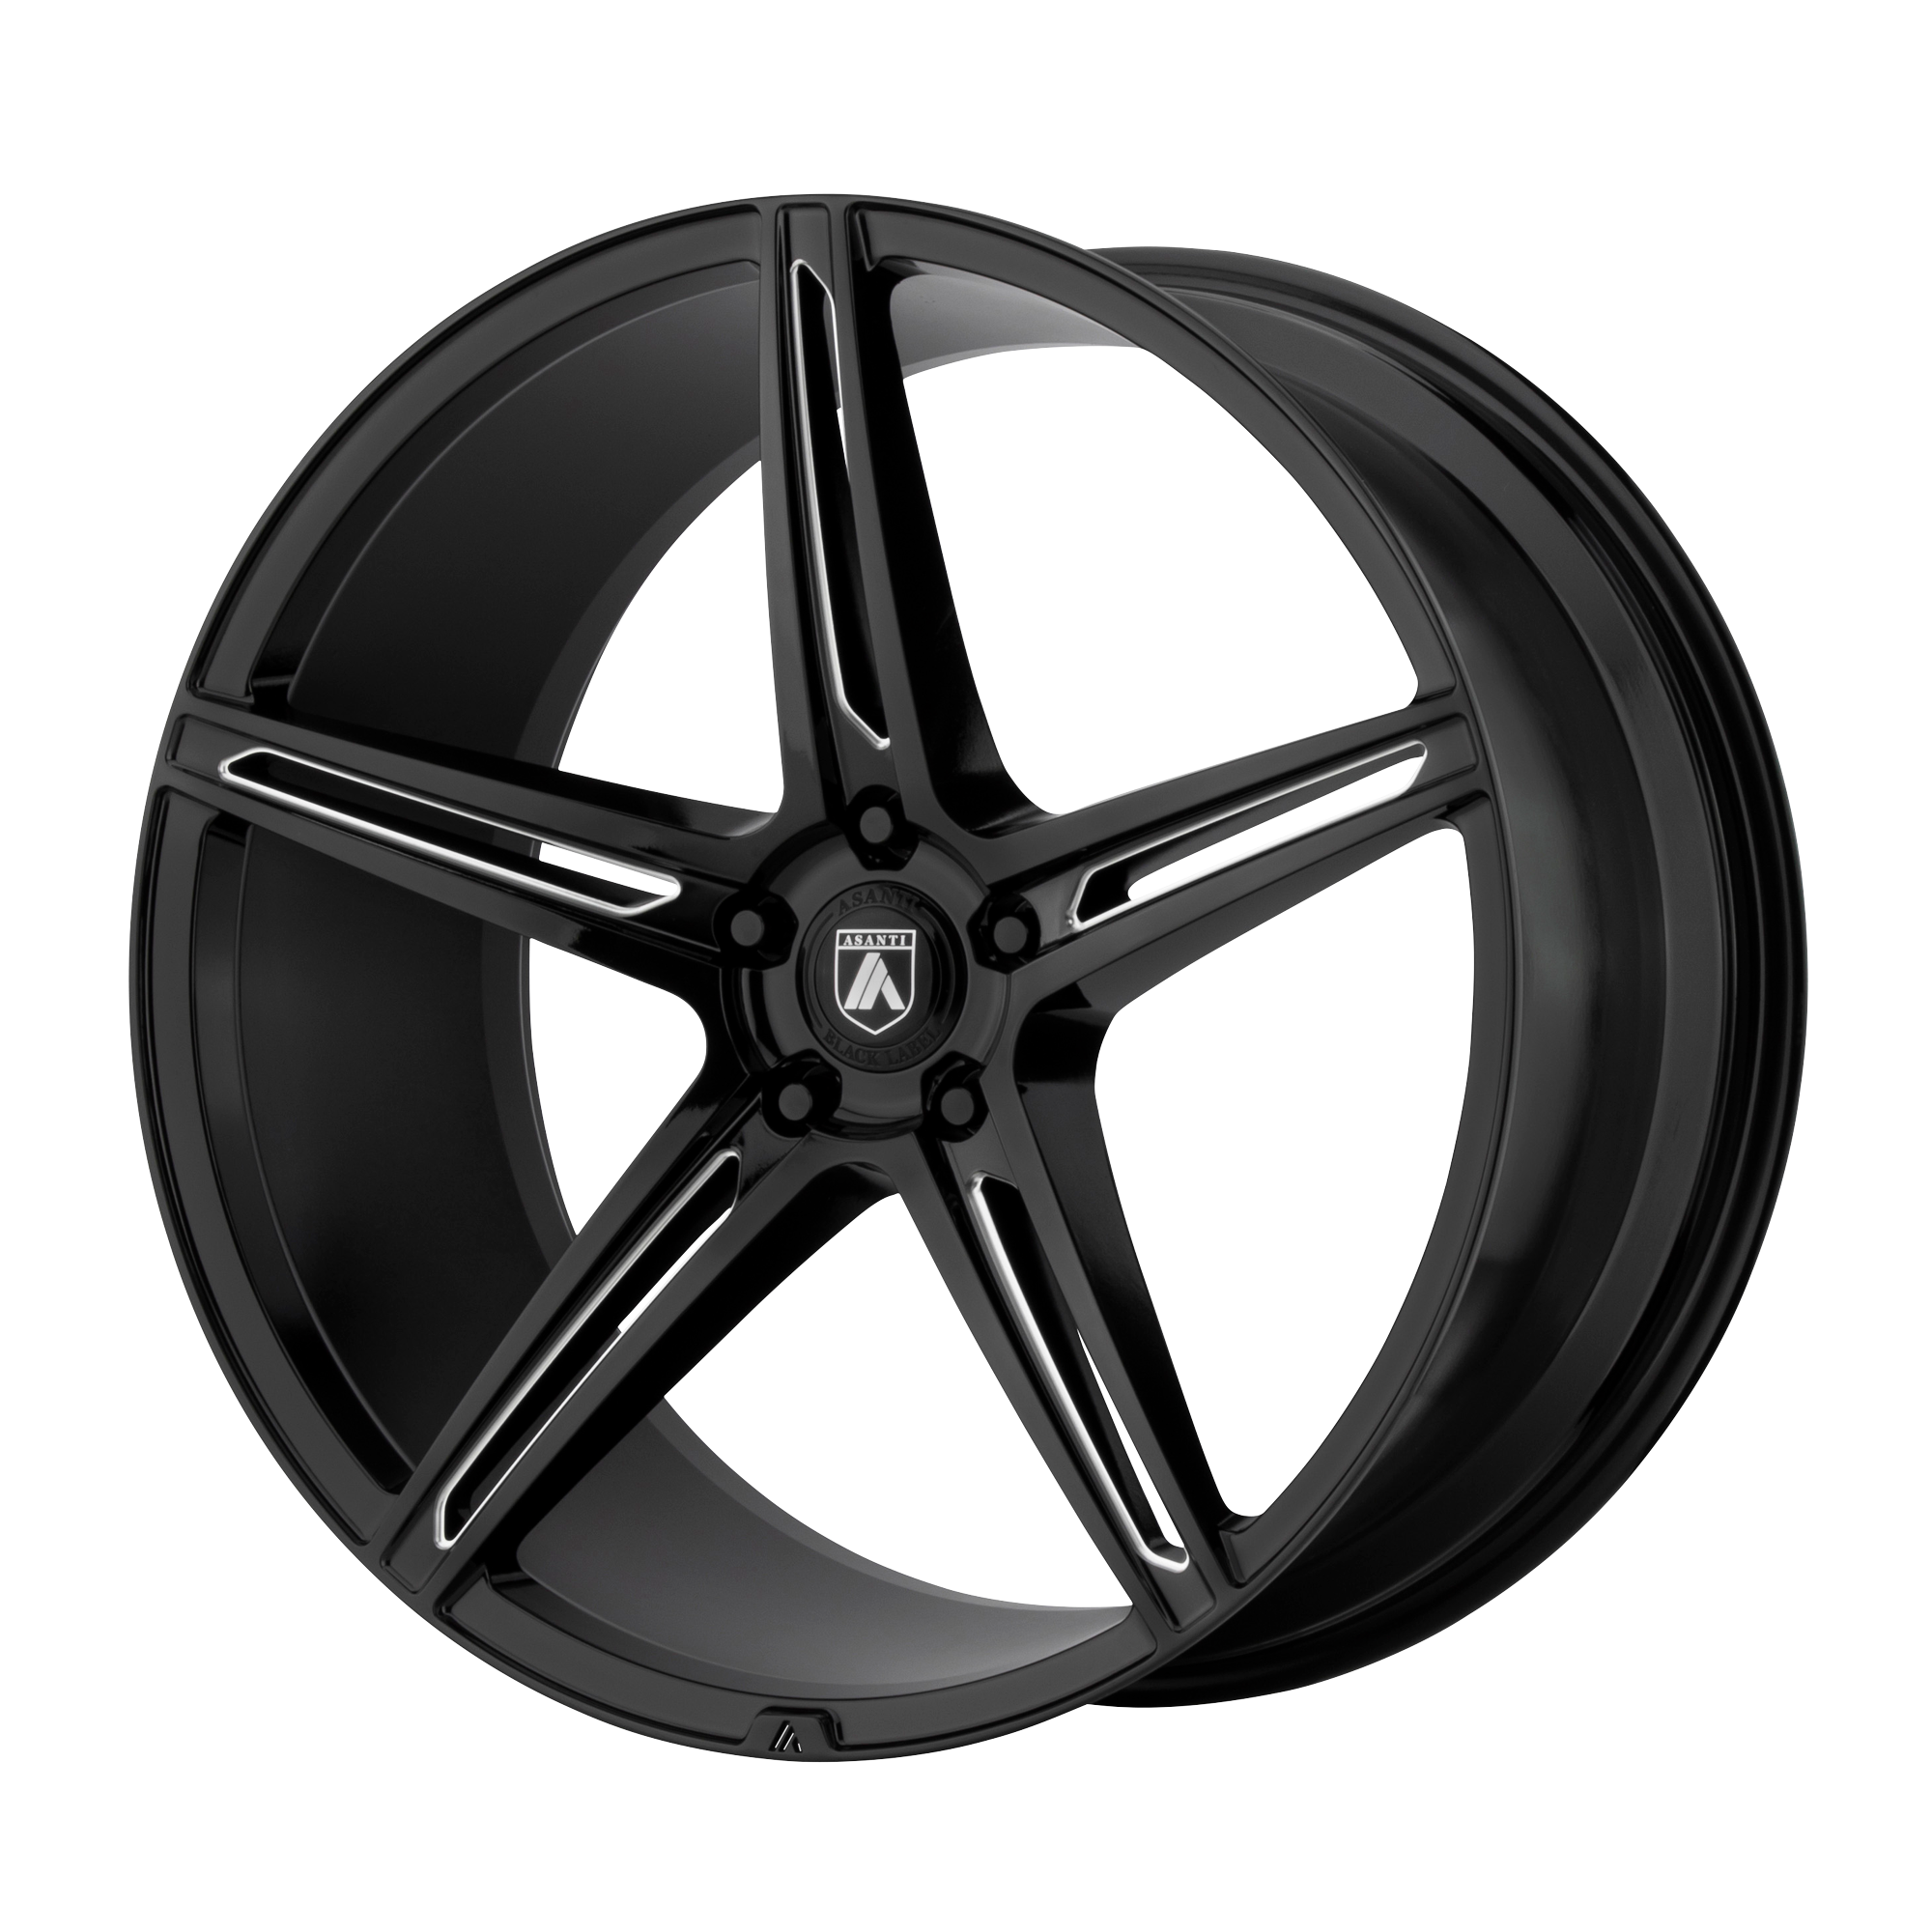 ALPHA 5 22x10.5 5x114.30 GLOSS BLACK MILLED (35 mm) - Tires and Engine Performance